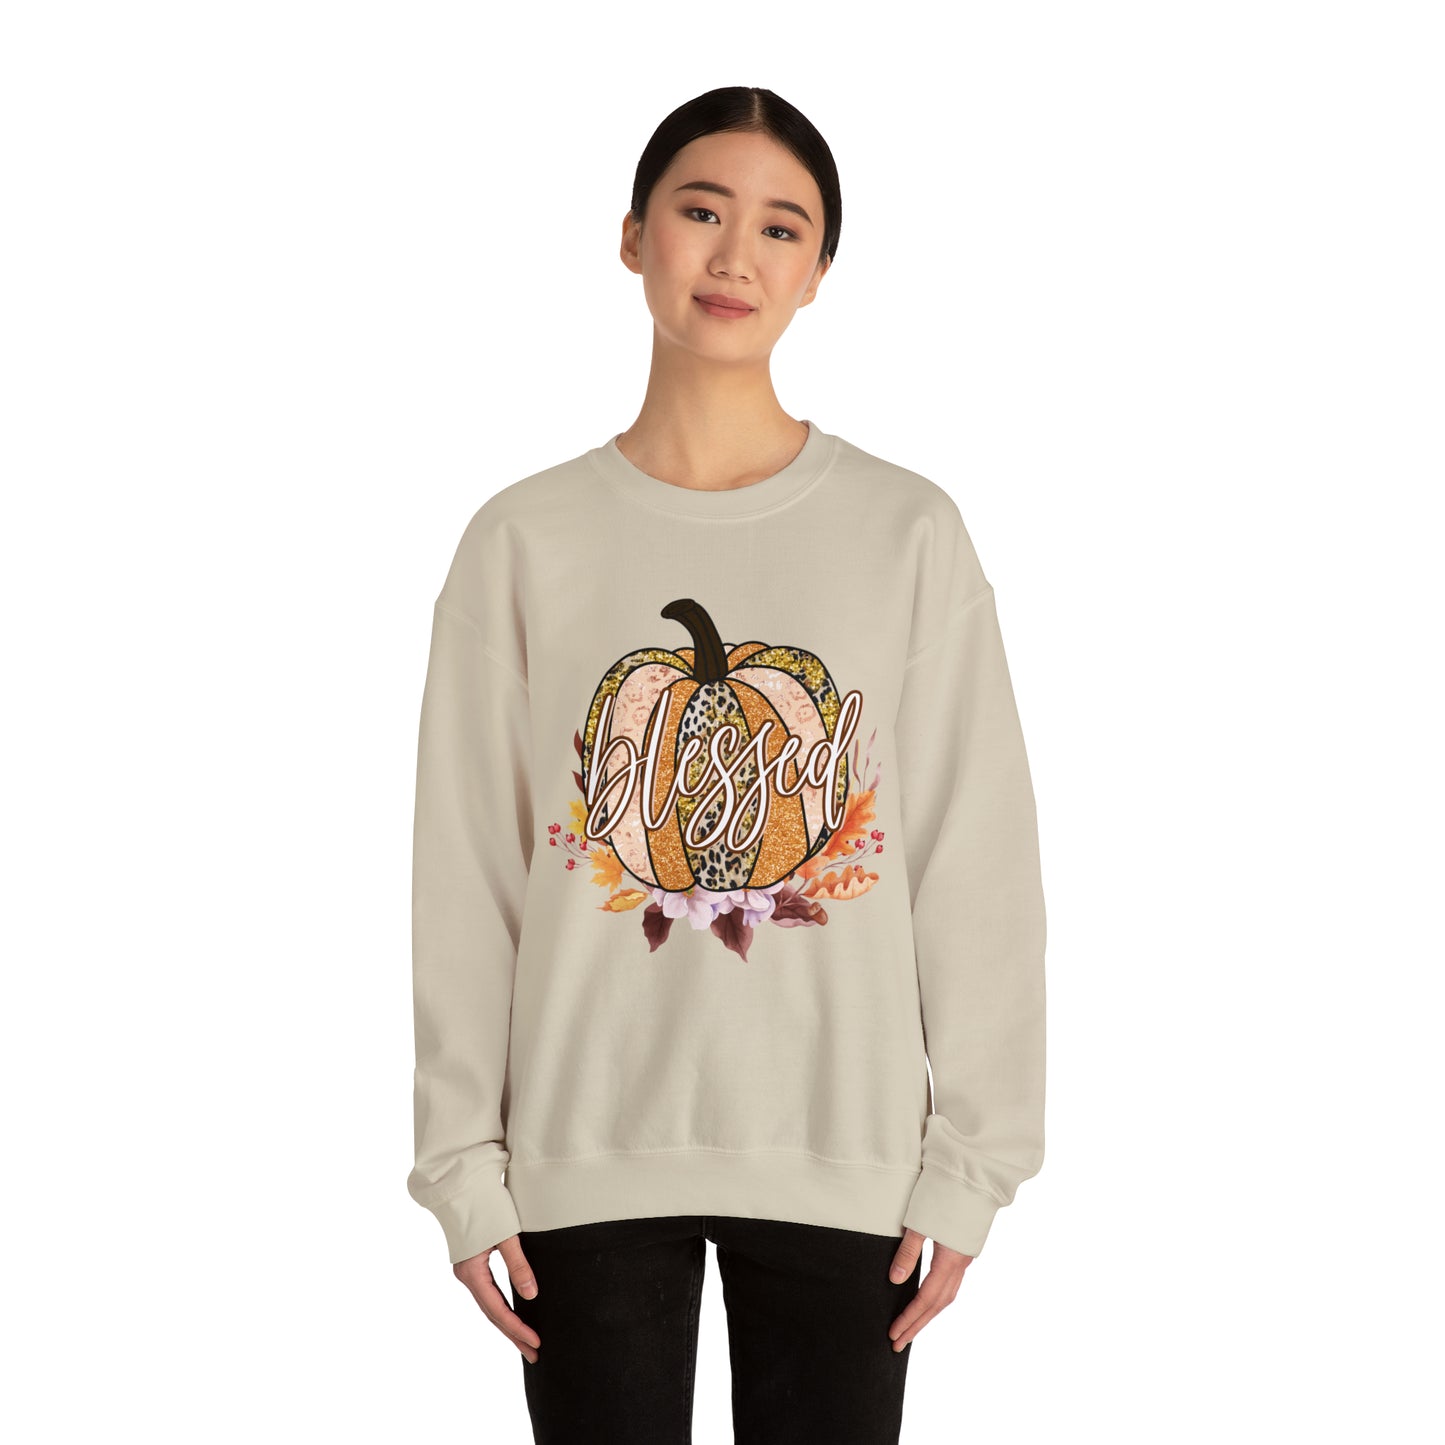 "Blessed & Autumn-Infused: The Quintessential Fall Sweater"